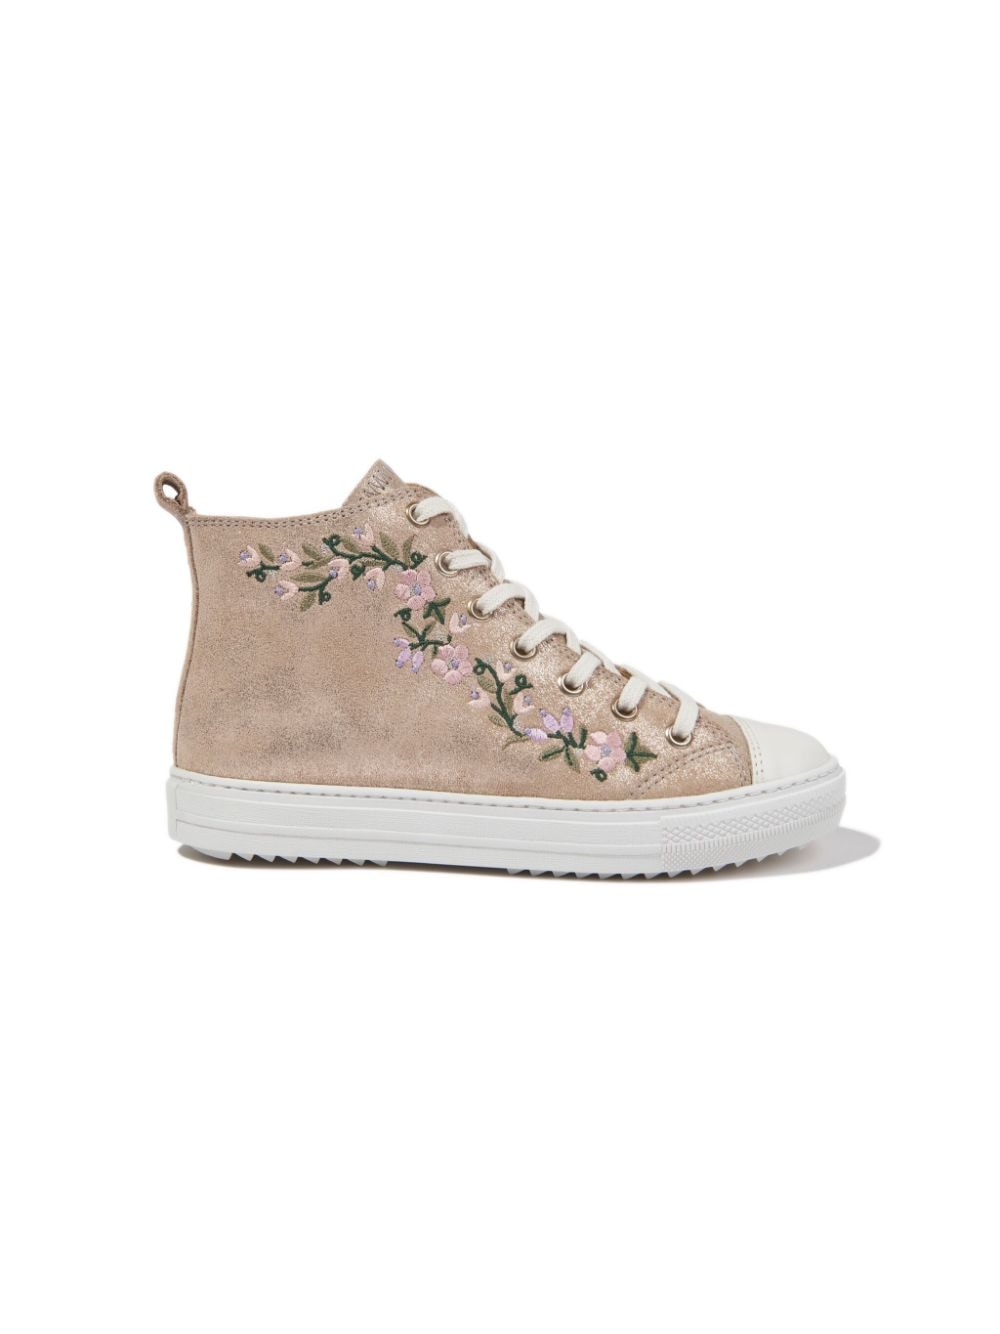 Pom D'api floral-embroidery leather sneakers - Gold von Pom D'api